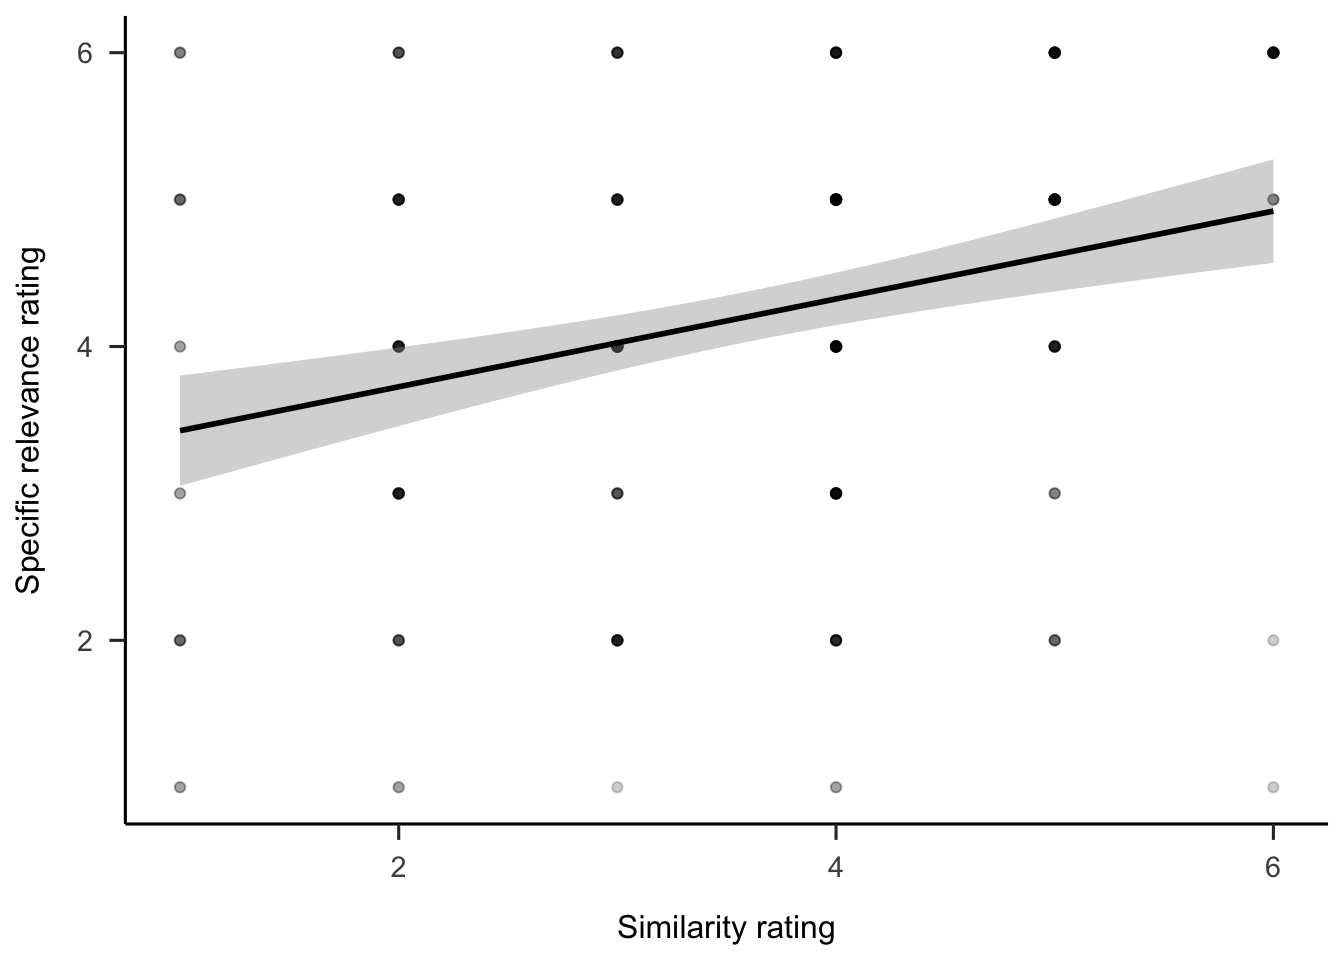 Rating of how relevant participants considered the anecdote to the target project, by similarity rating. The shading represents 95% confidence intervals.